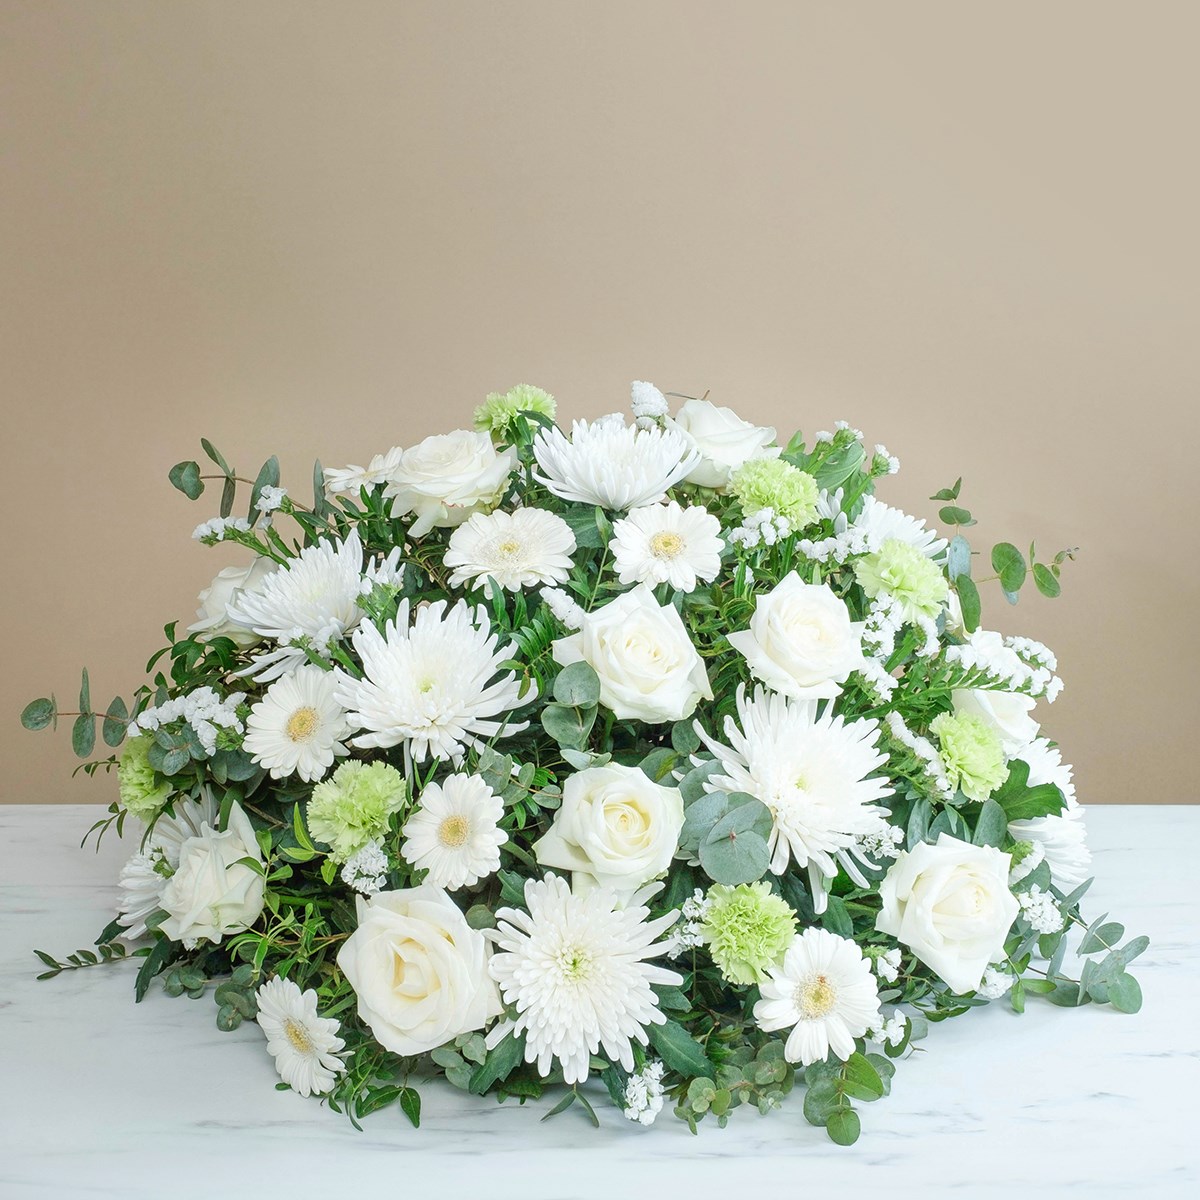 Funeral centrepiece in white tones